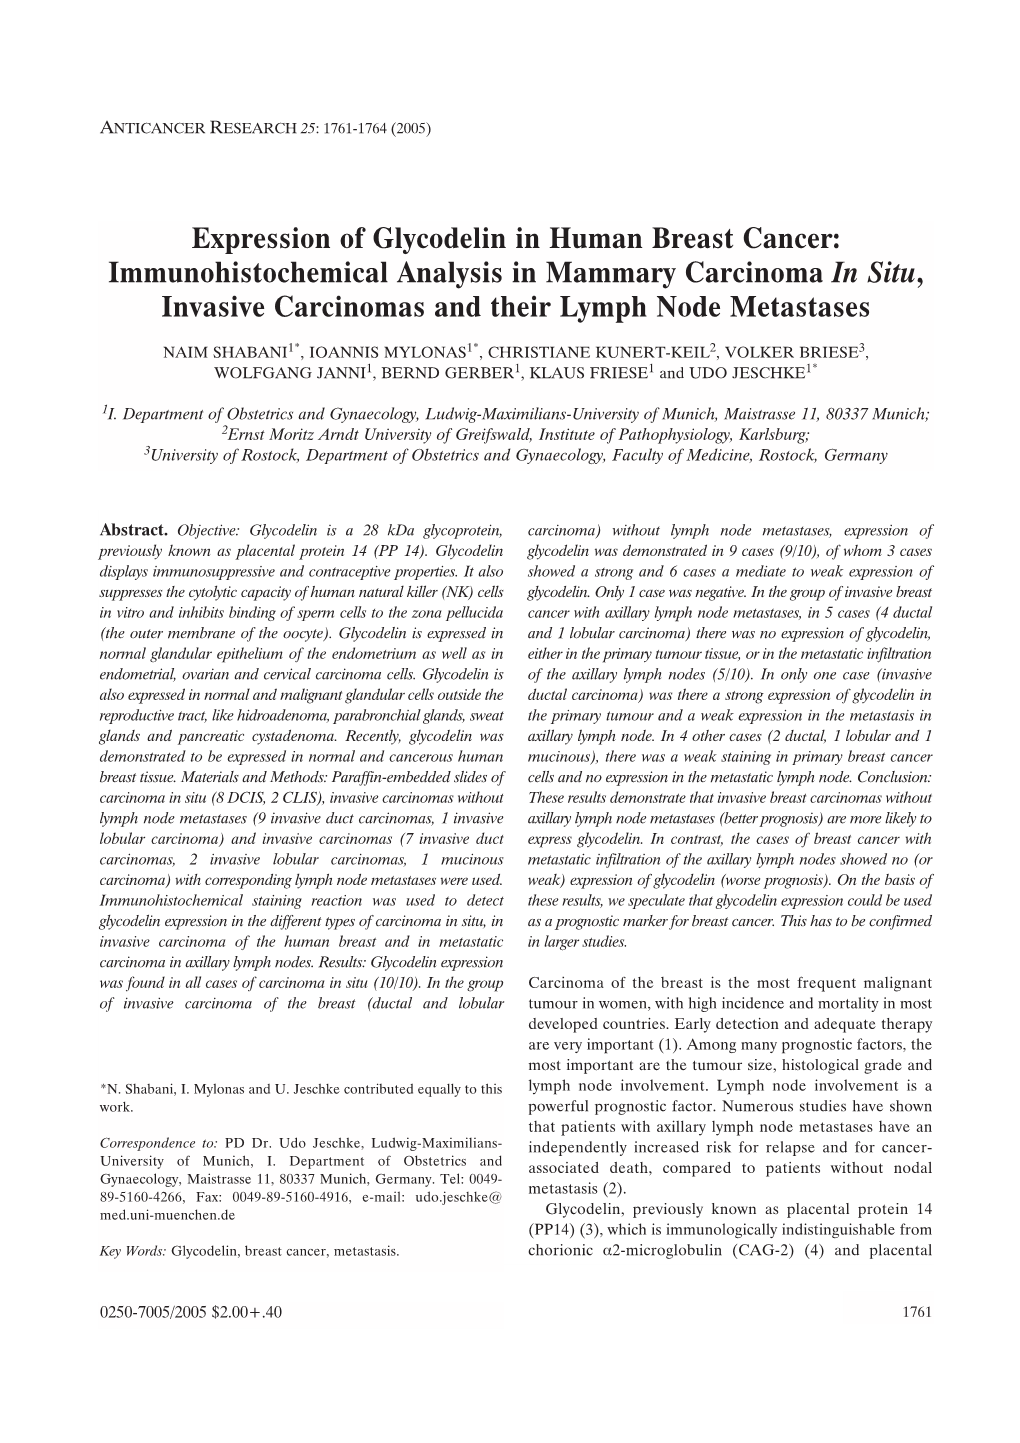 Expression of Glycodelin in Human Breast Cancer: Immunohistochemical Analysis in Mammary Carcinoma in Situ, Invasive Carcinomas and Their Lymph Node Metastases